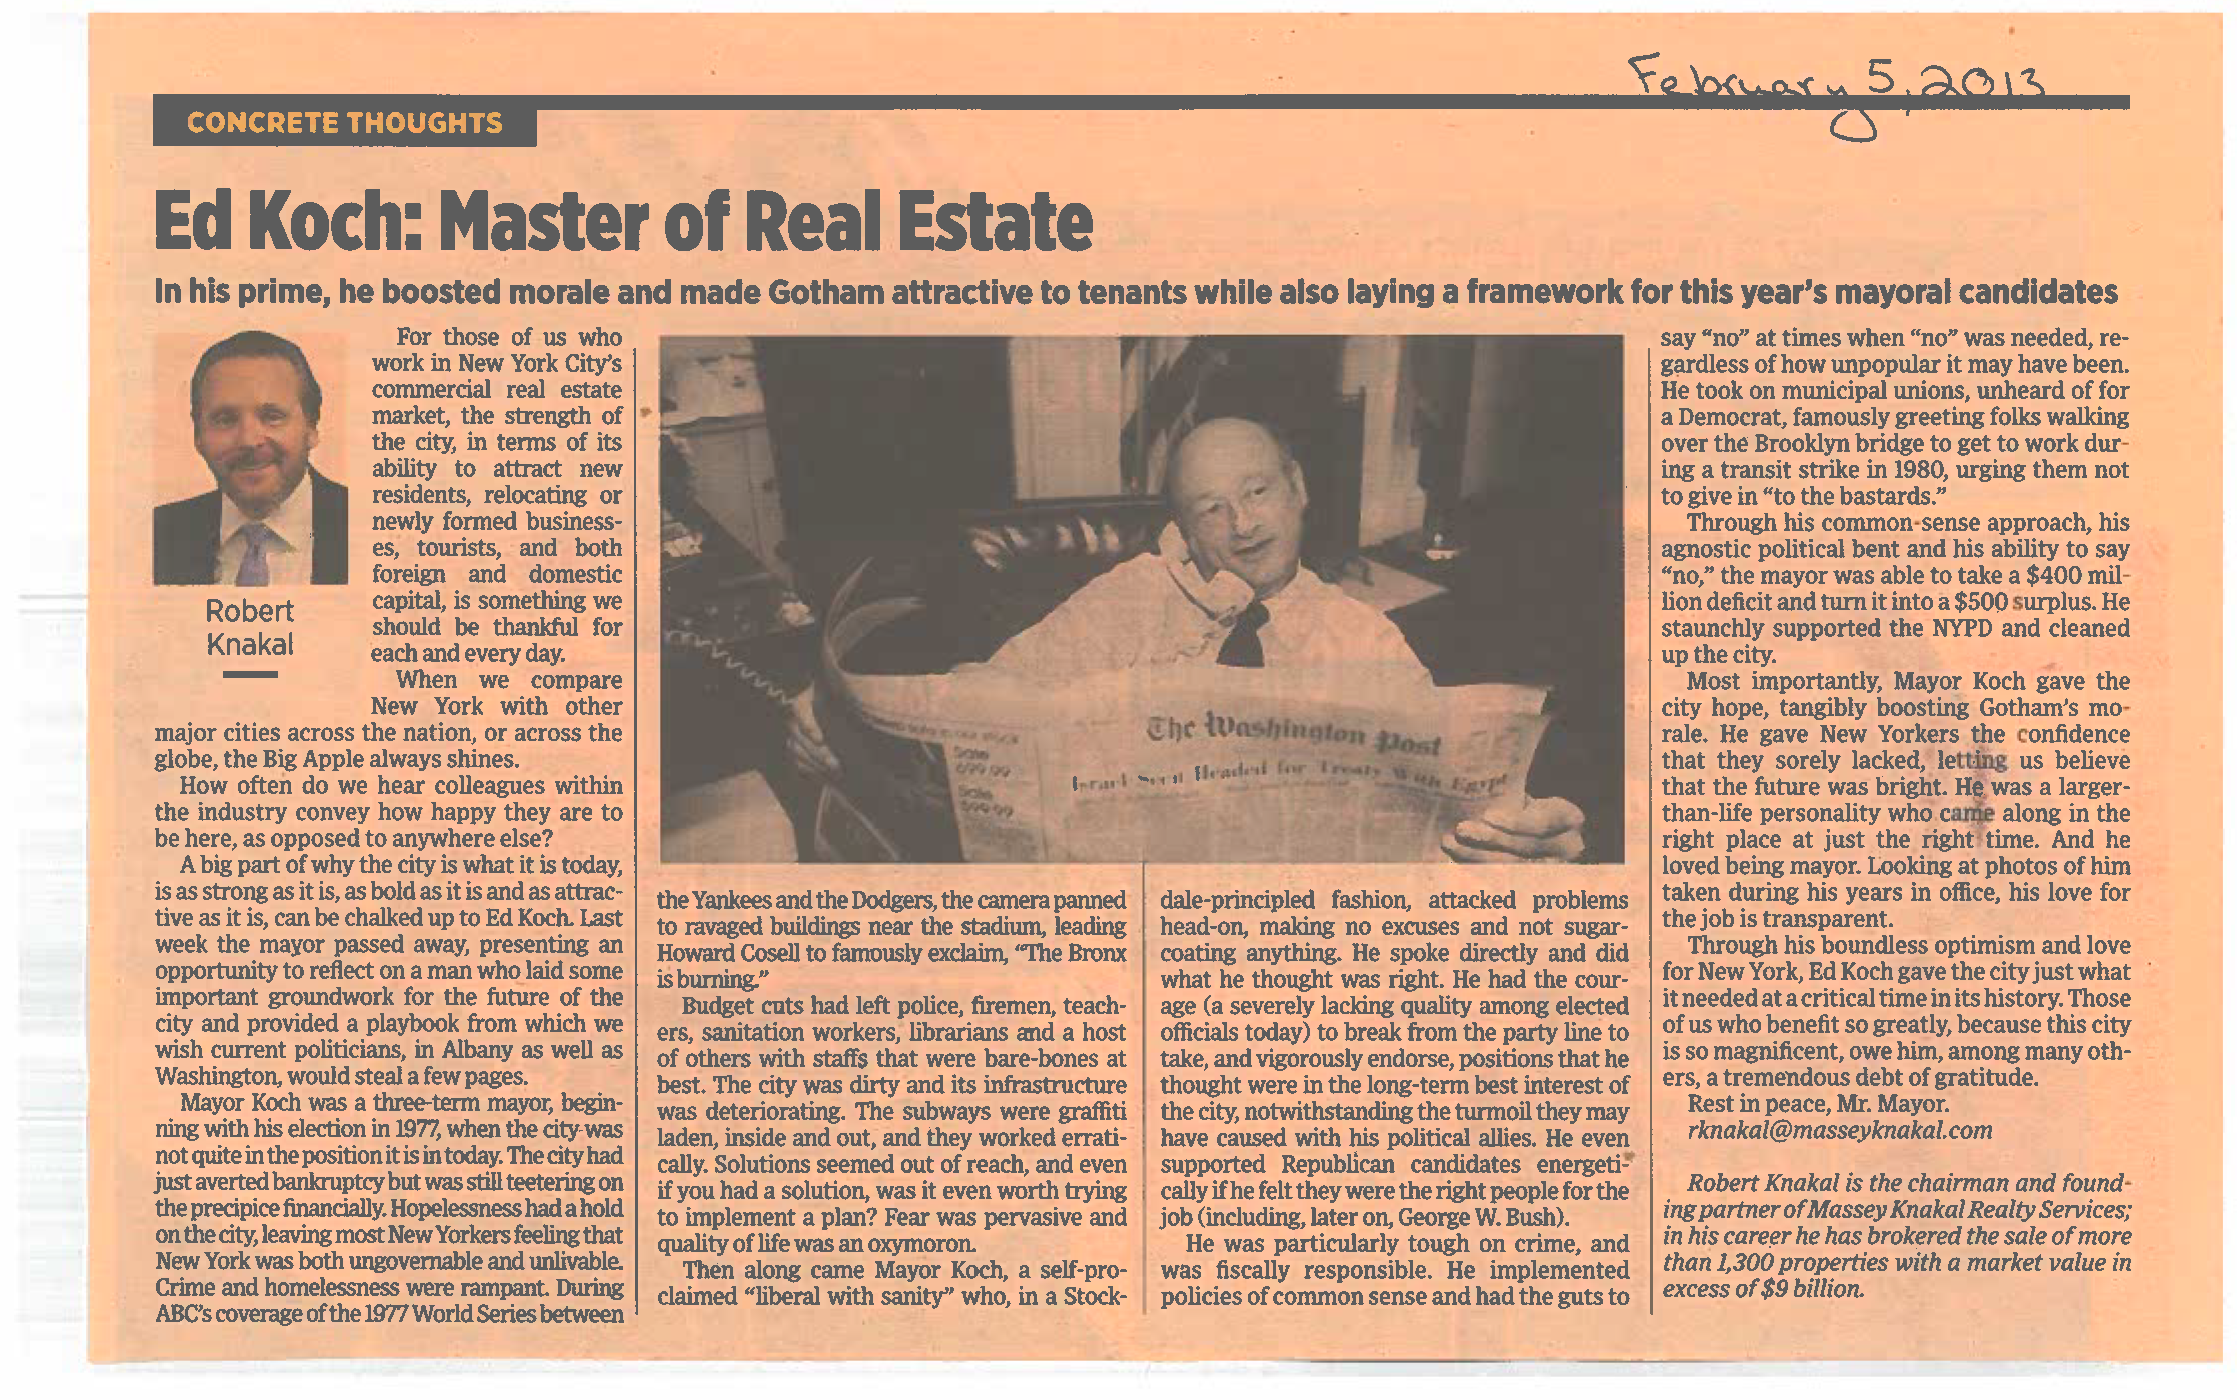 Concrete Thoughts - Ed Koch - Master of Real Estate - Feb 5 2013